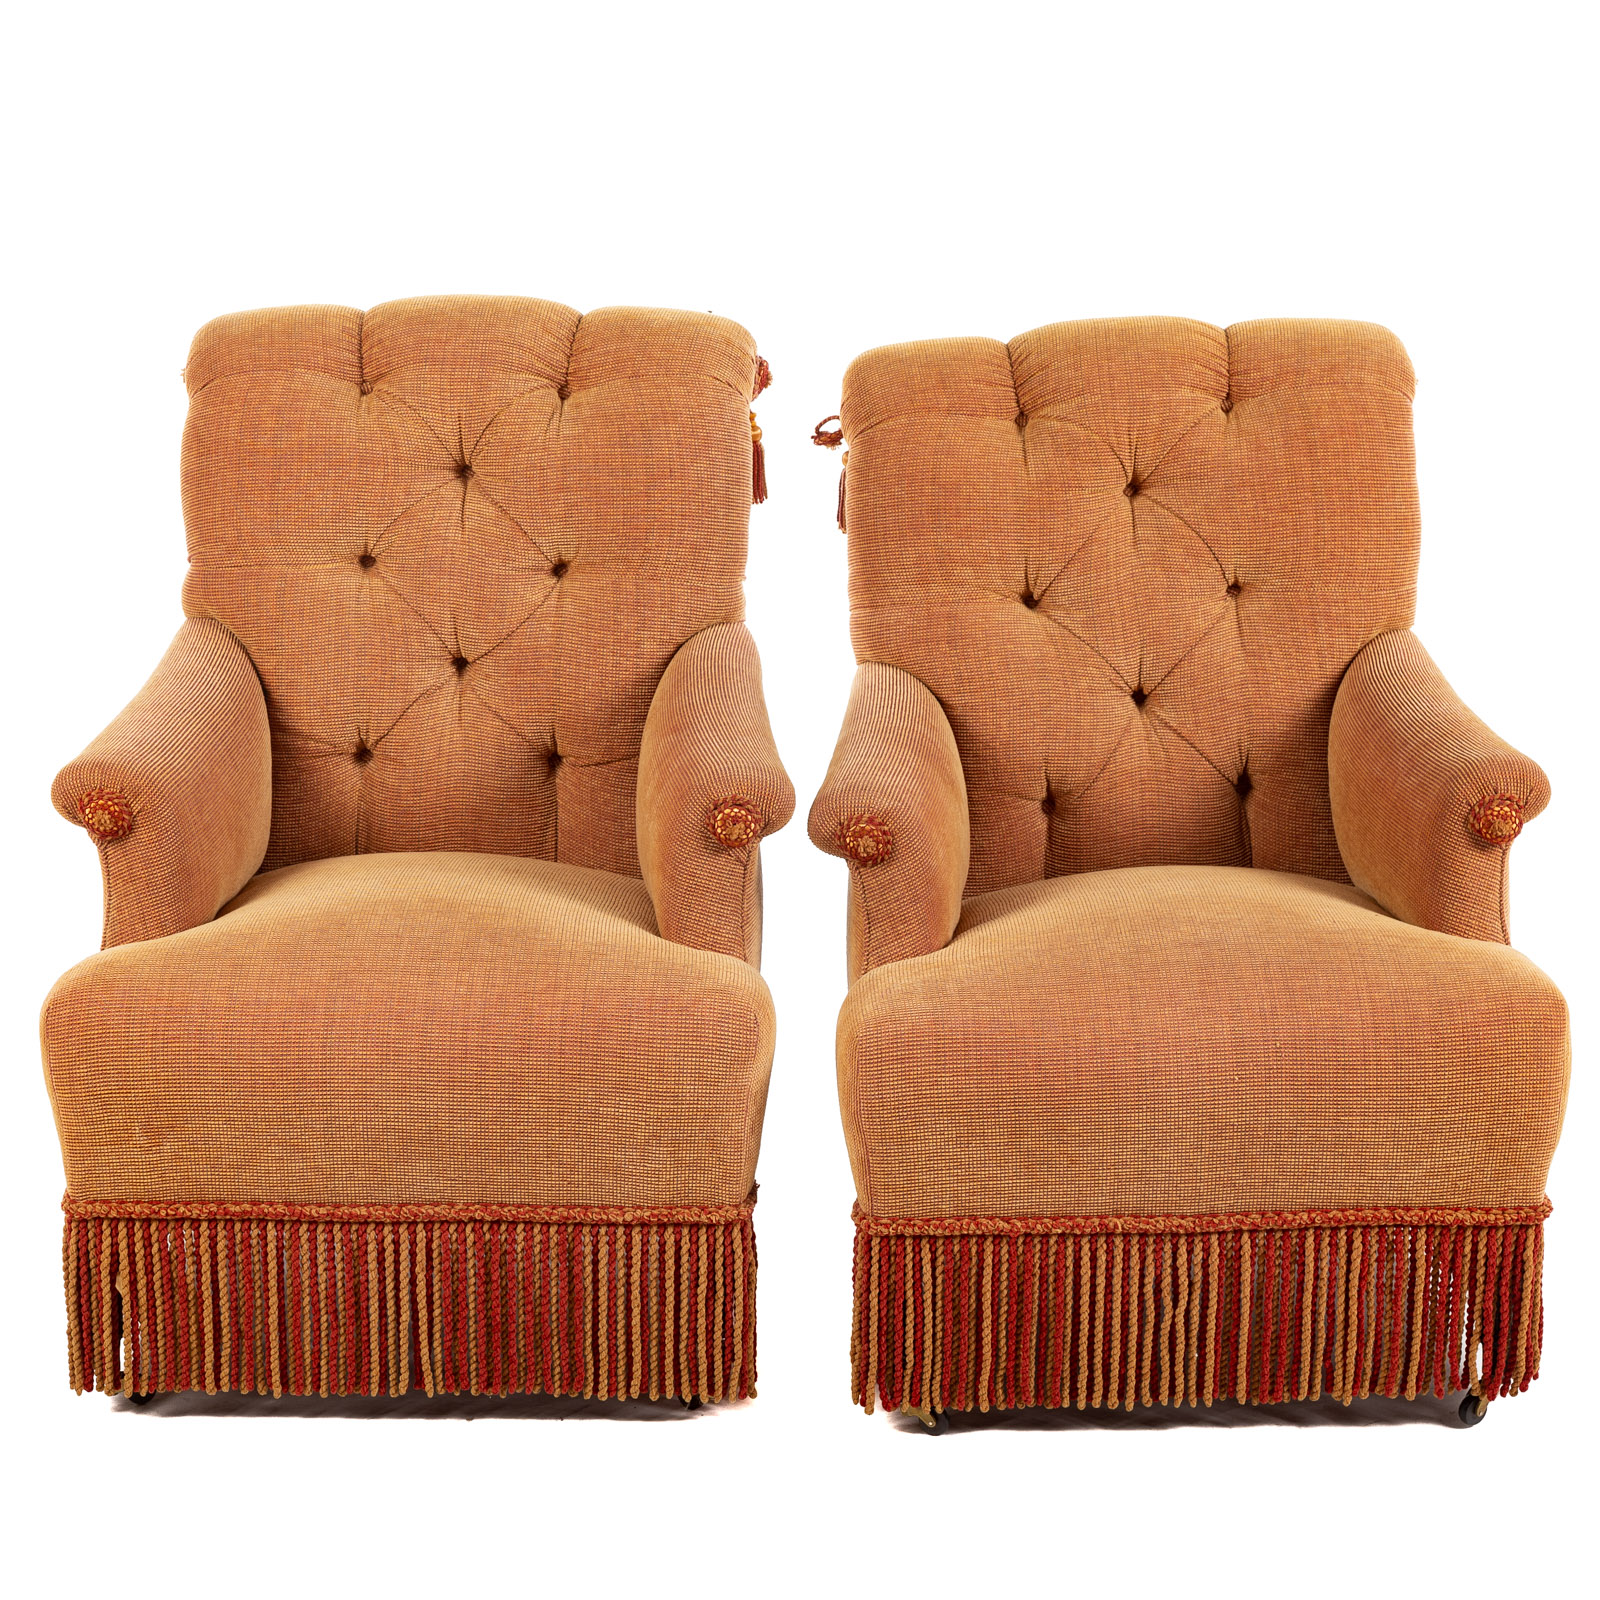 A PAIR OF TUFTED UPHOLSTERED OCCASIONAL